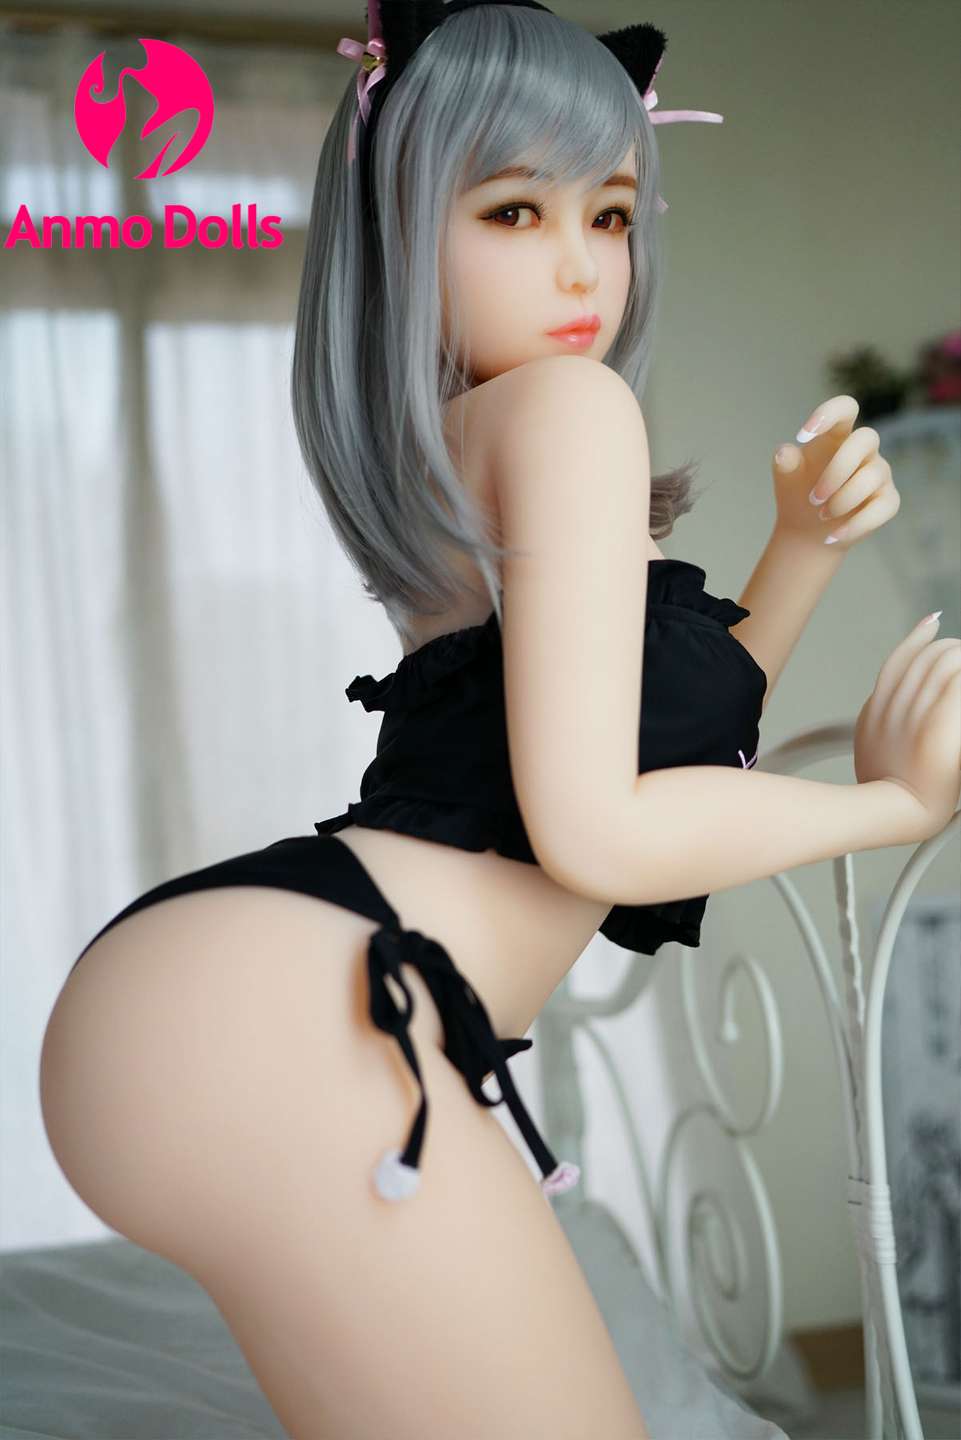 Emilia - Hot young Sex doll with a round butt